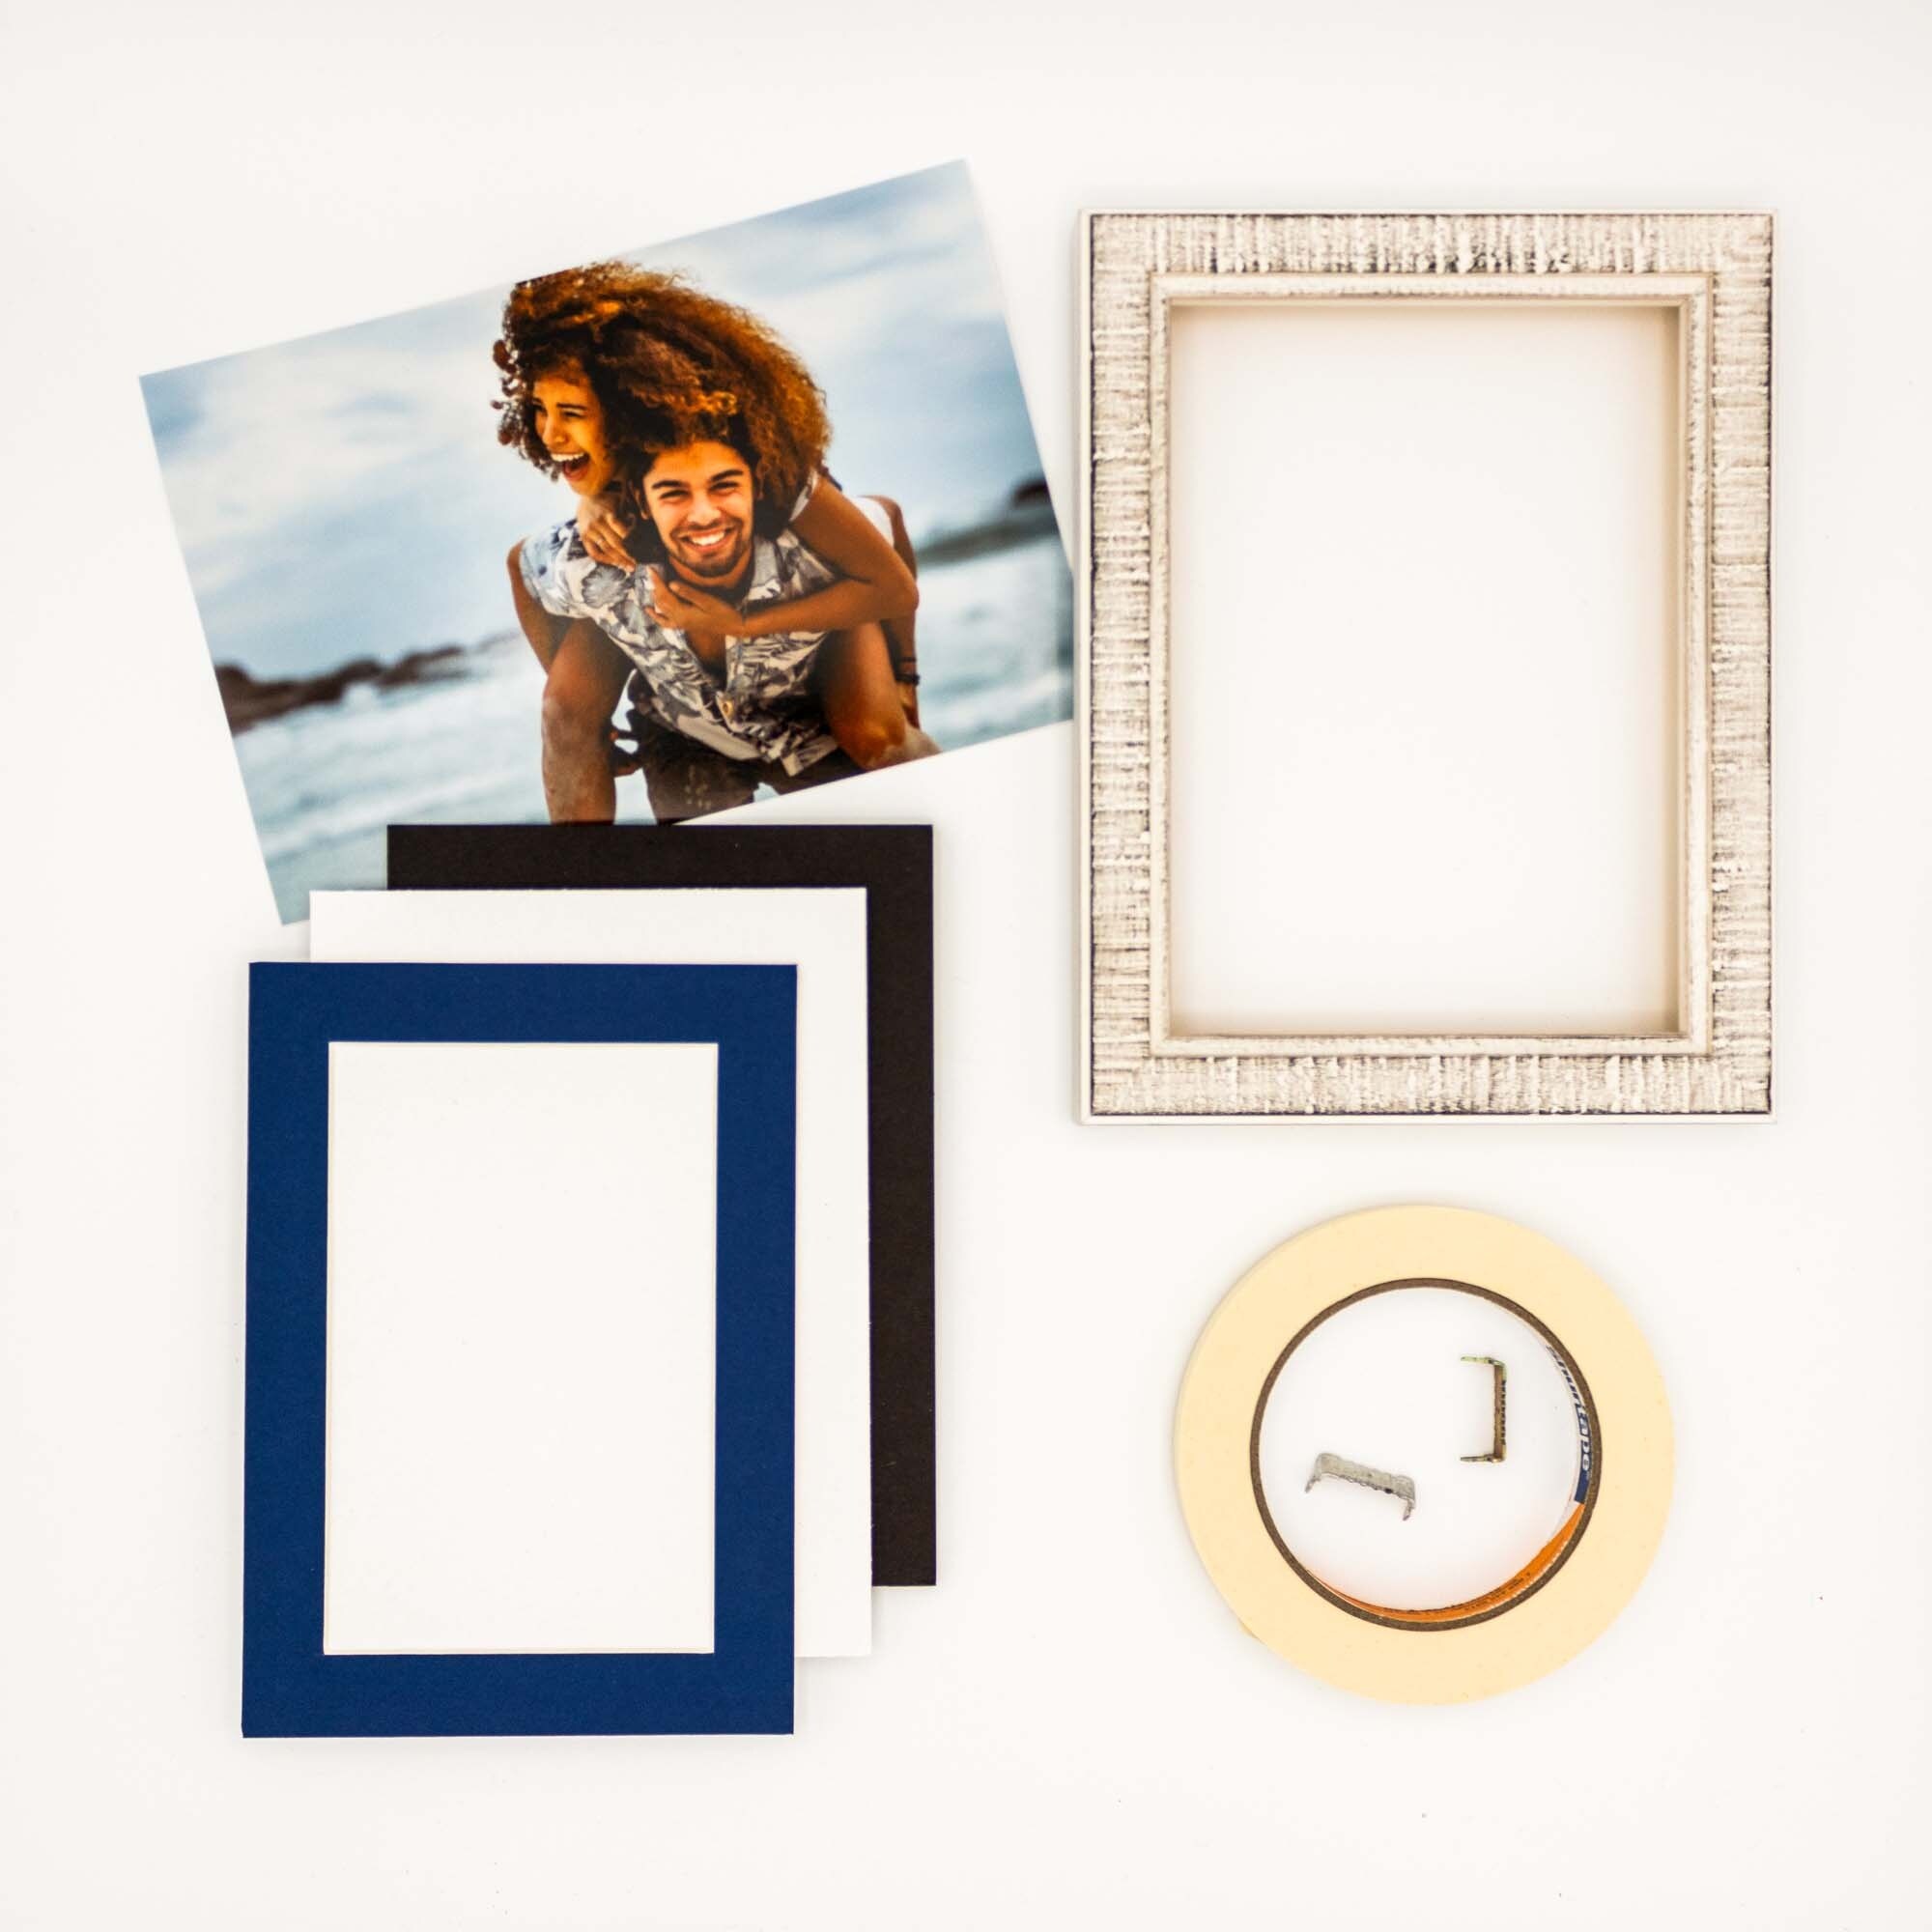 11x14 Mat Bevel Cut for 9x11 Photos - Acid Free Steel Blue Precut Matboard  - For Pictures, Photos, Framing - Bed Bath & Beyond - 38473651